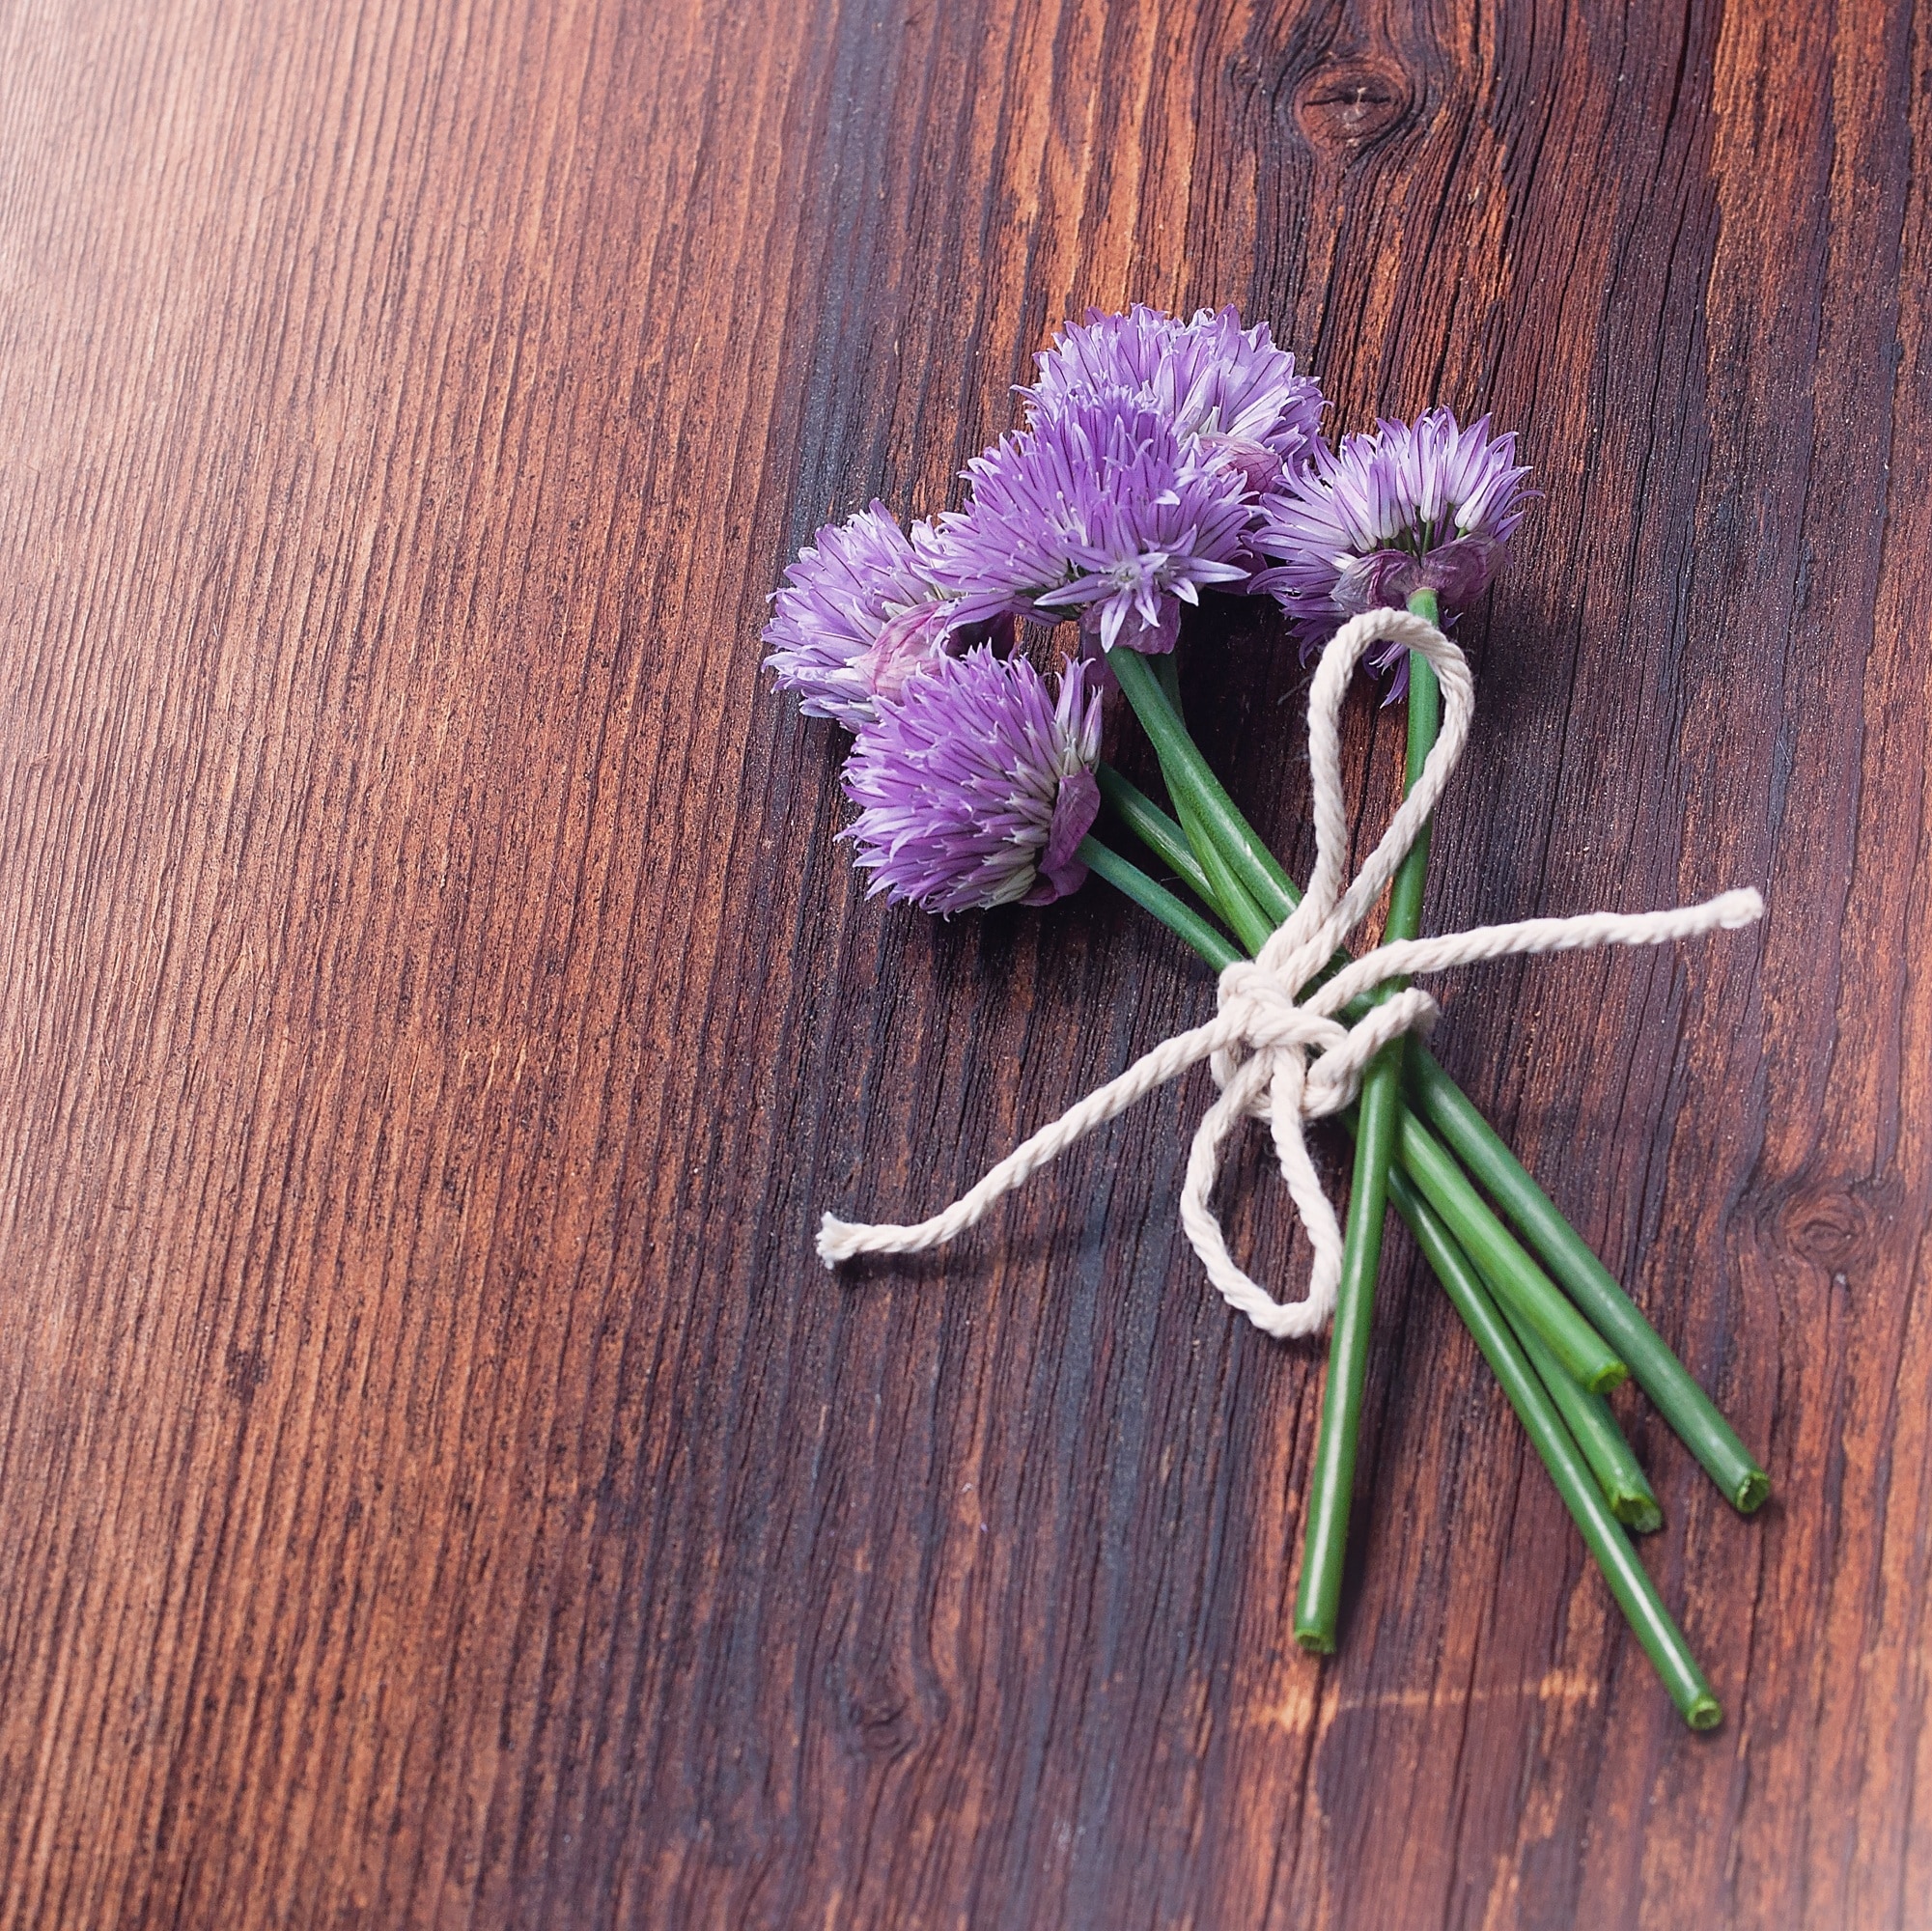 Bloom, Blossom, Chives, wood - material, flower